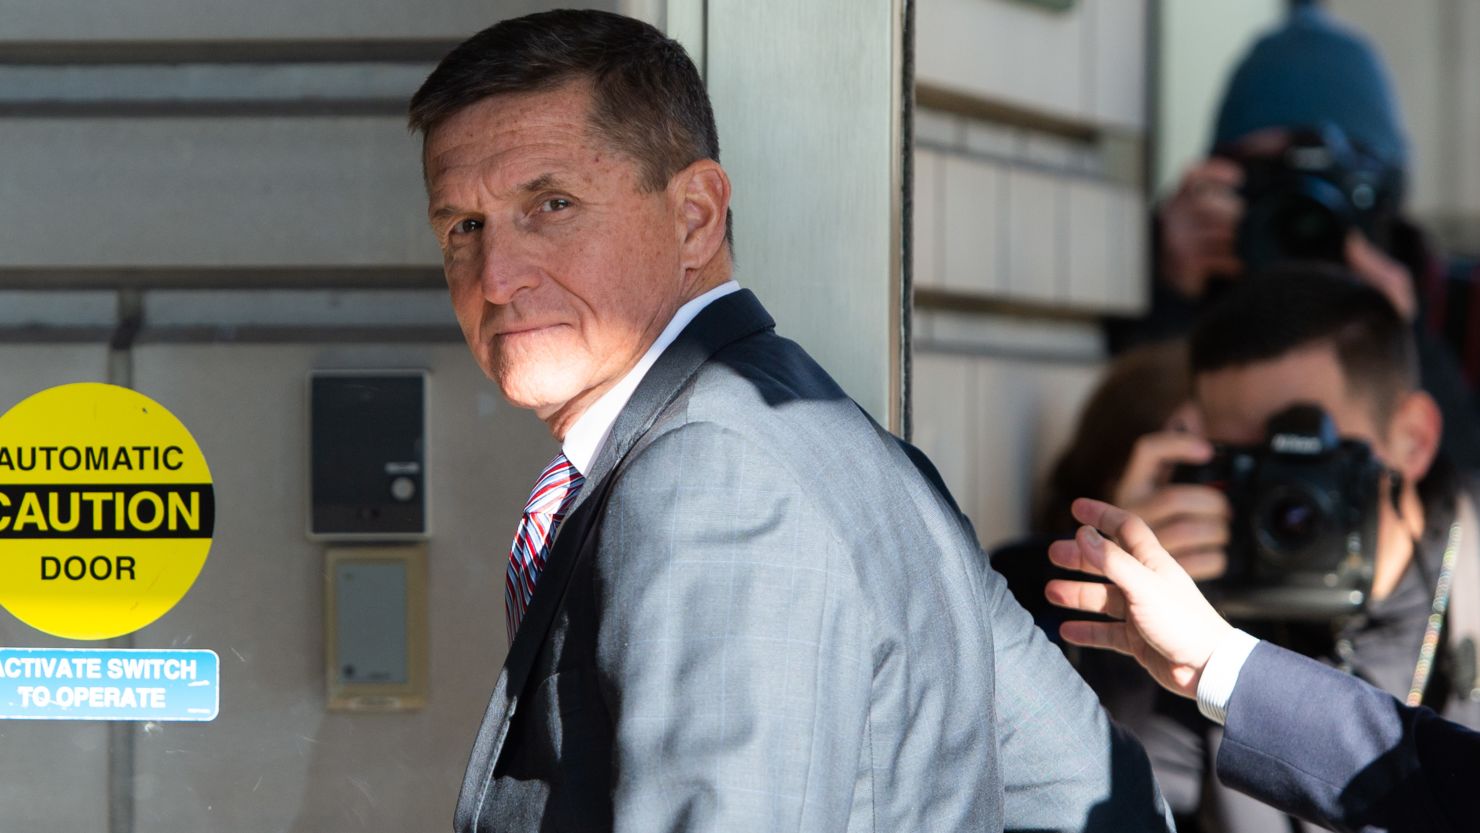 Former US National Security Advisor General Michael Flynn arrives for his sentencing hearing at US District Court in Washington, DC on December 18, 2018.